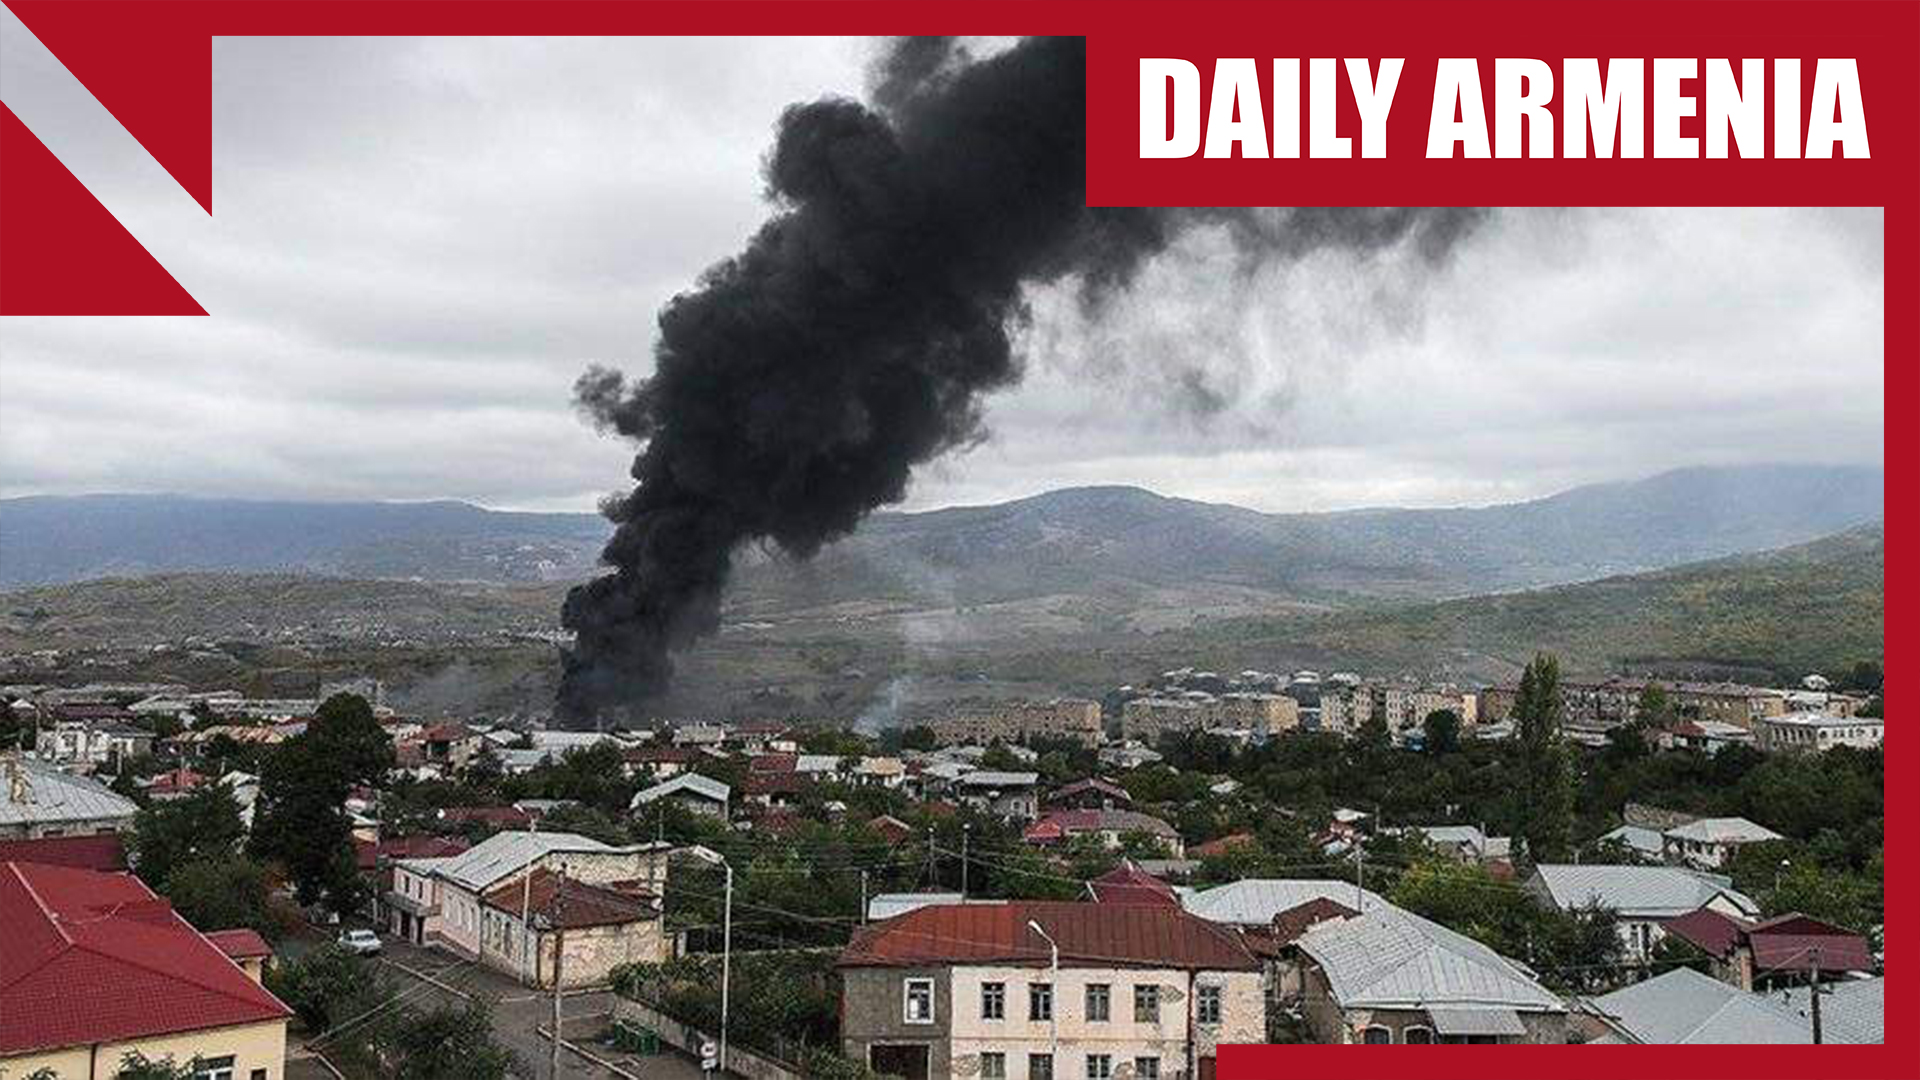 BREAKING: At least 2 dead as Azerbaijan launches major attack on Karabakh